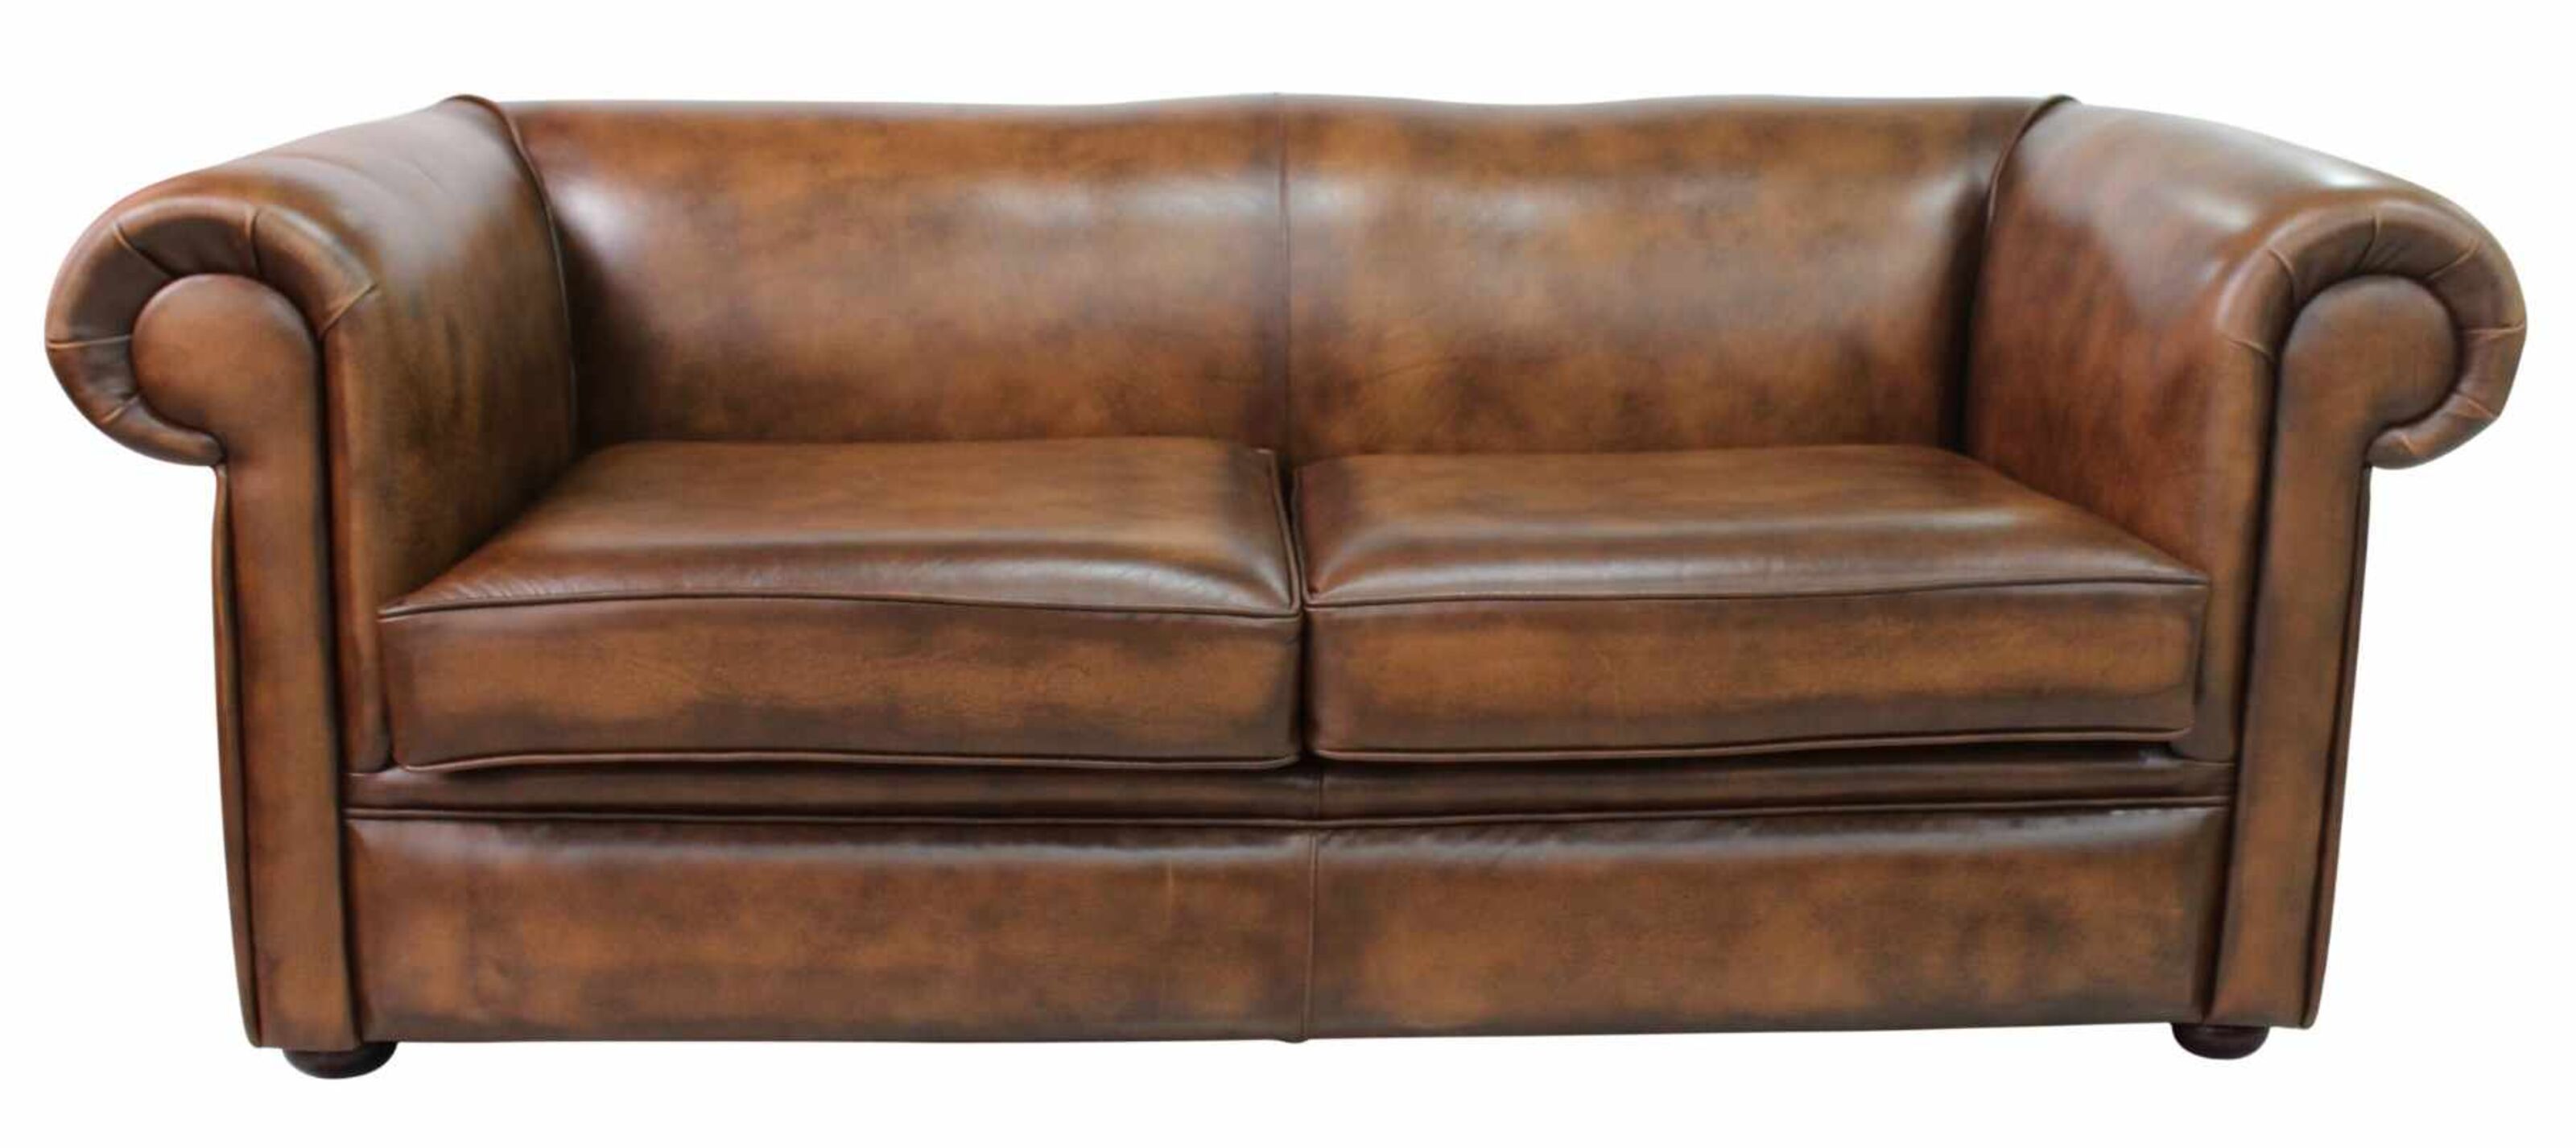 Crafting Elegance The Origin and Artistry of Chesterfield Sofa Production  %Post Title